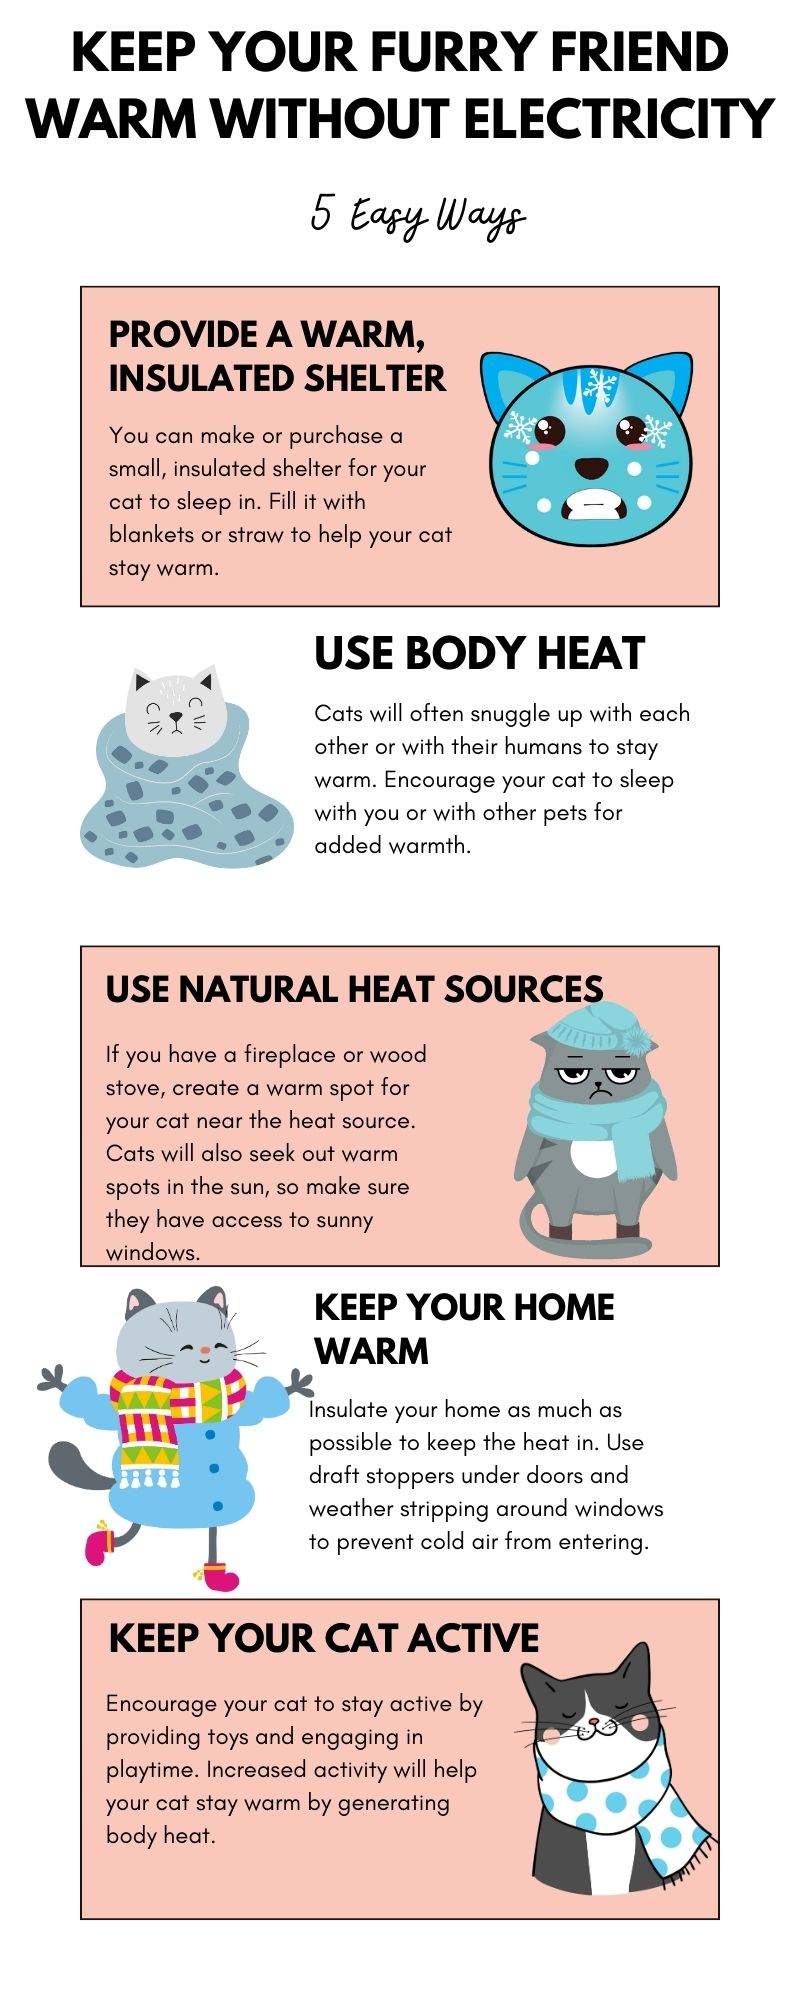 Keep Your Furry Friend Warm Without Electricity